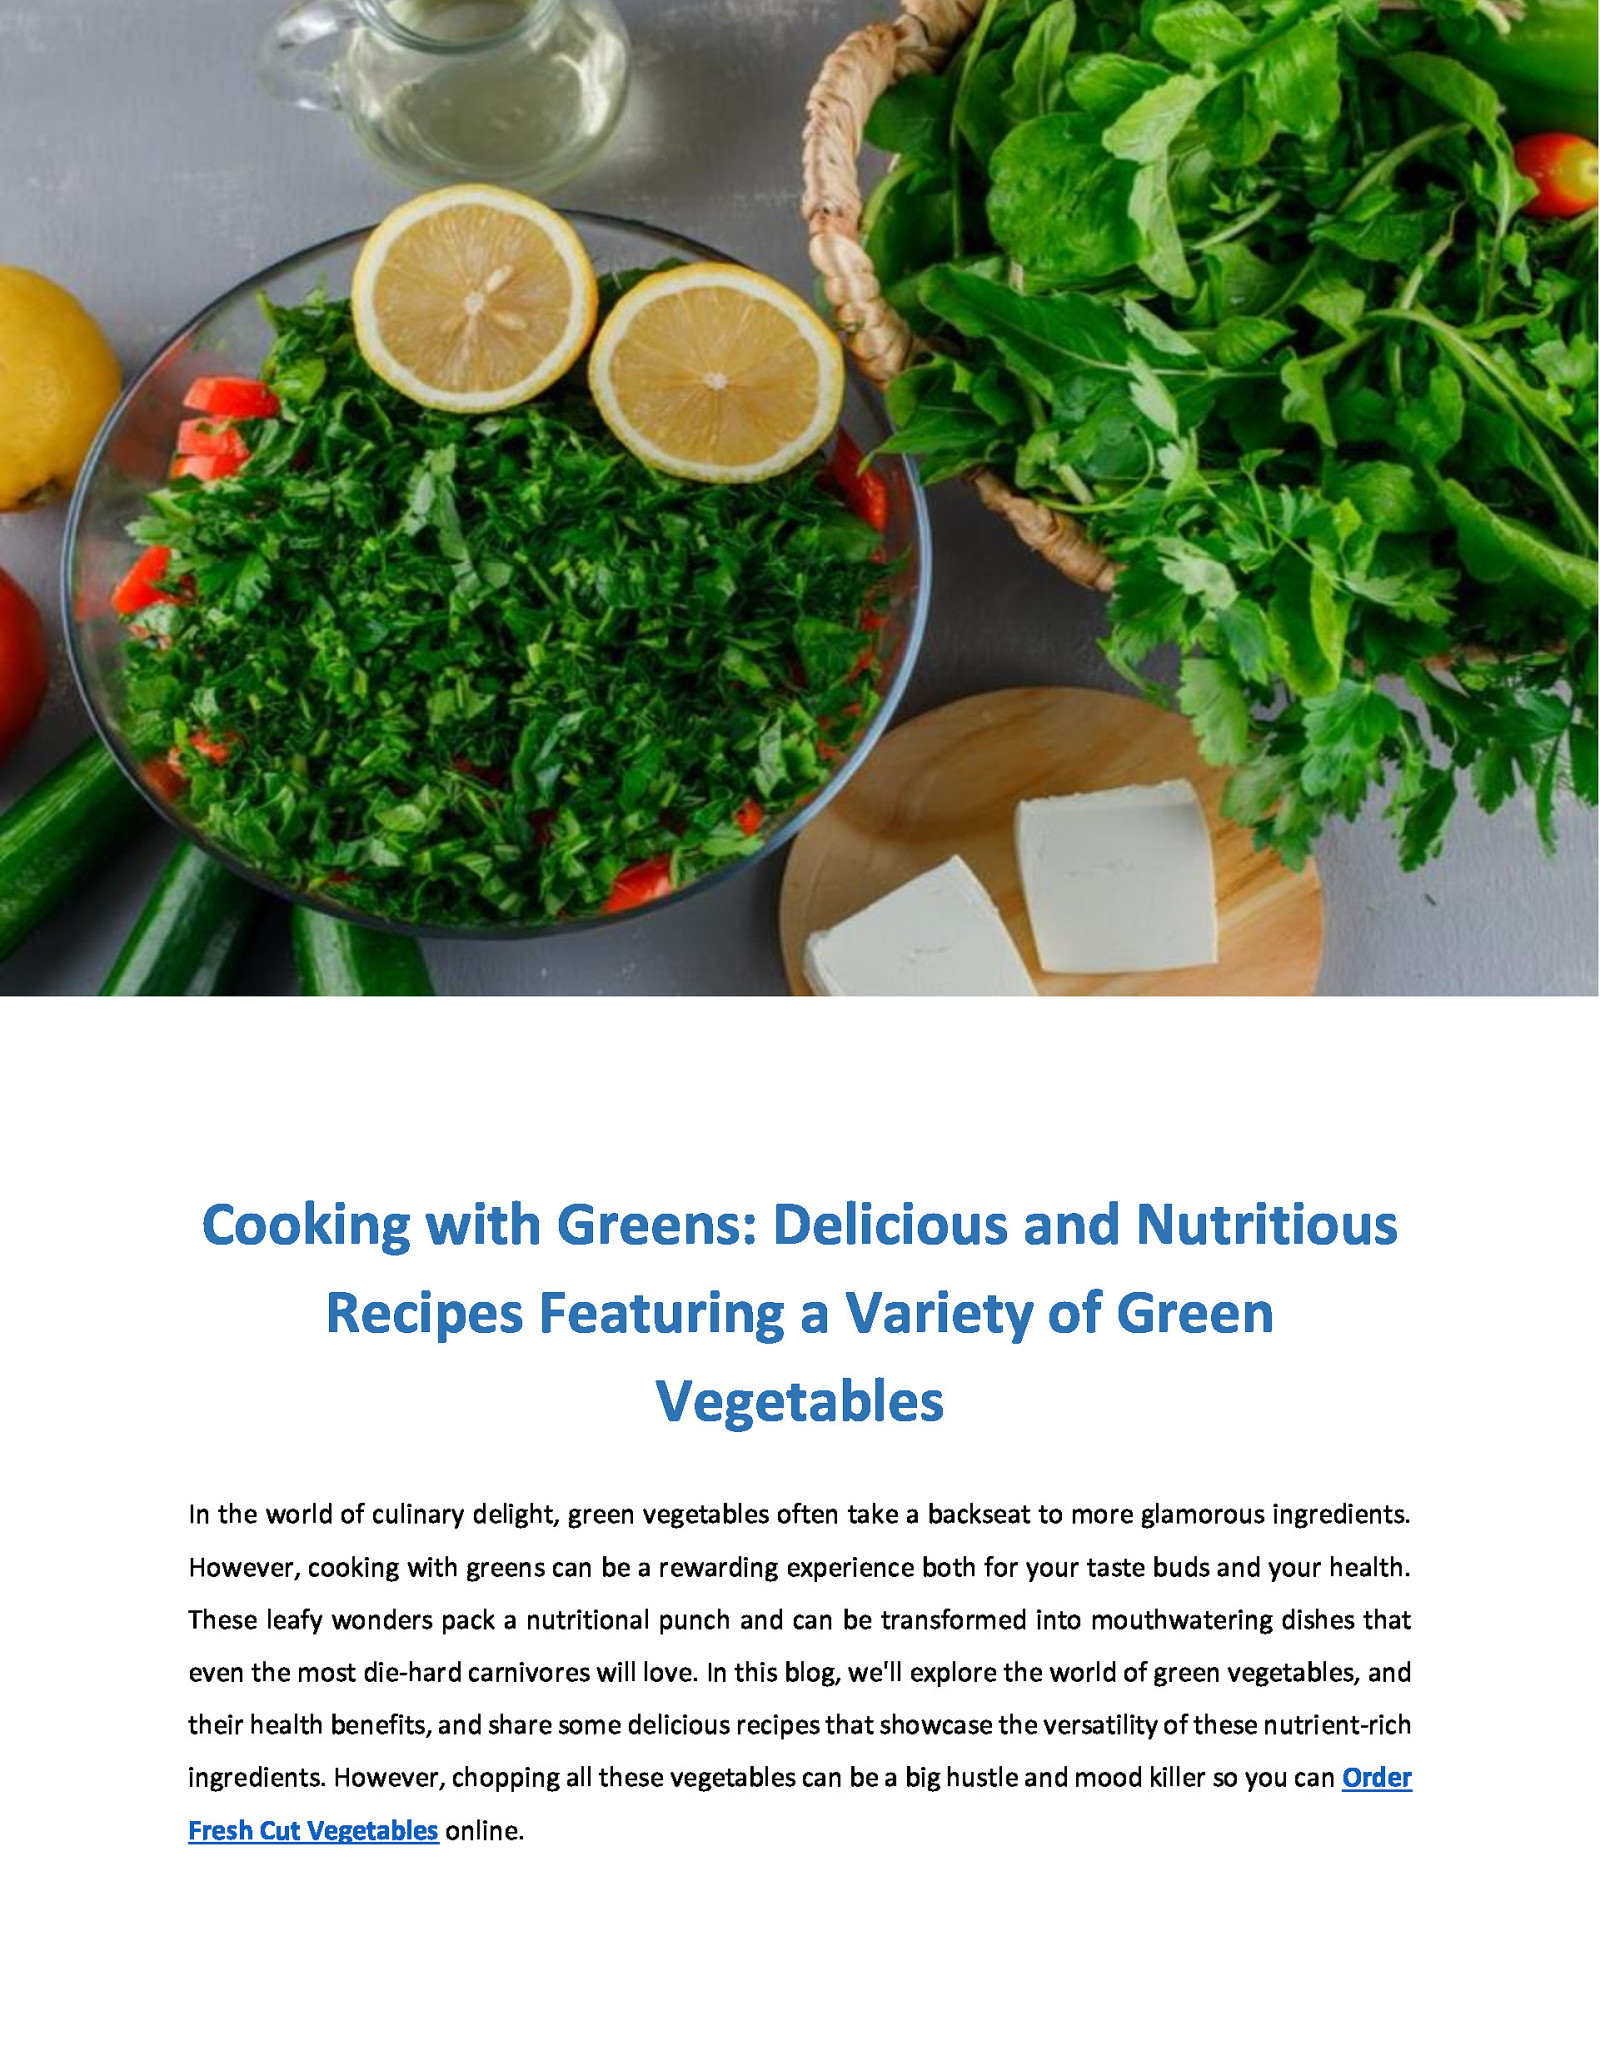 Cooking with Greens: Delicious and Nutritious Recipes Featuring a Variety of Green Vegetables